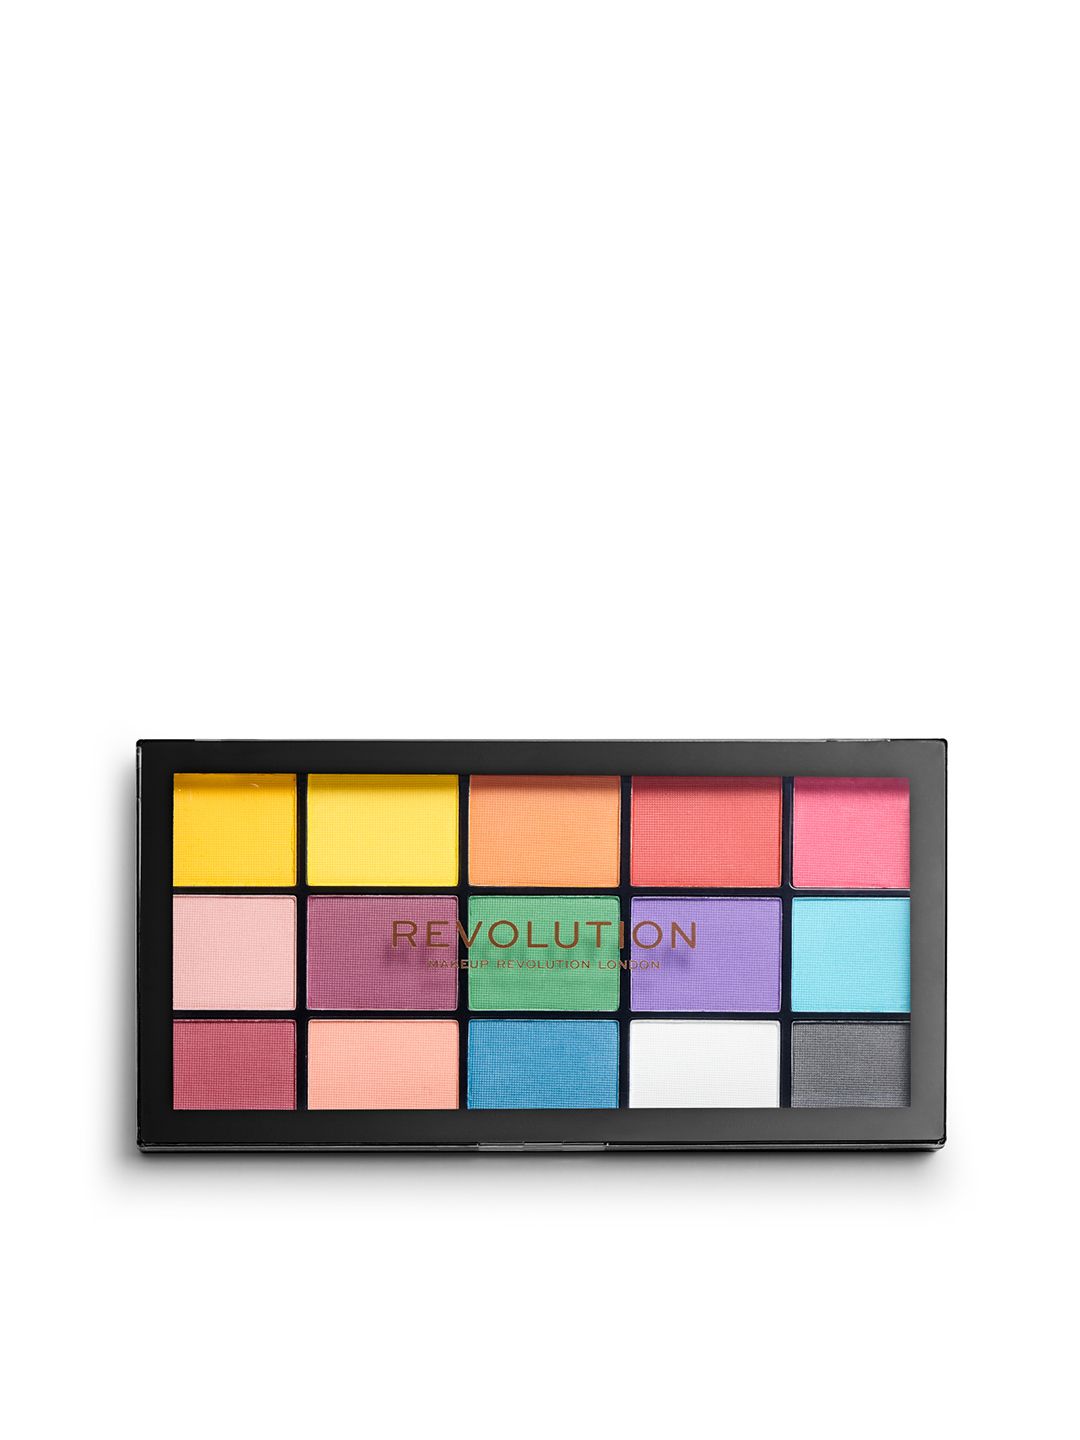 Makeup Revolution London Reloaded Eyeshadow Palette - Marvellous Mattes Price in India